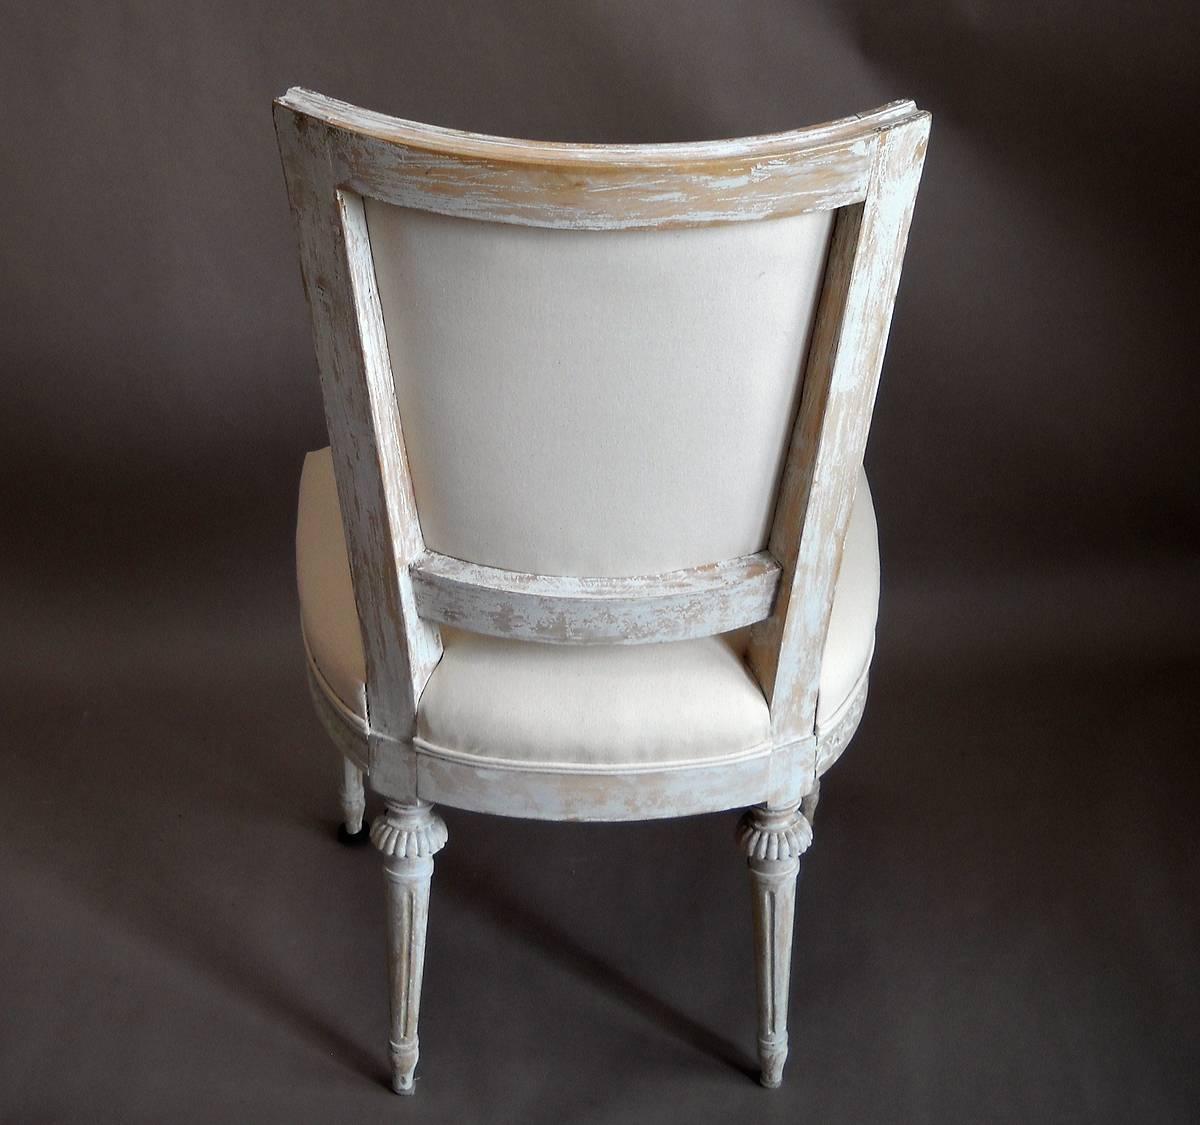 19th Century Pair of Square-Backed Swedish Chairs